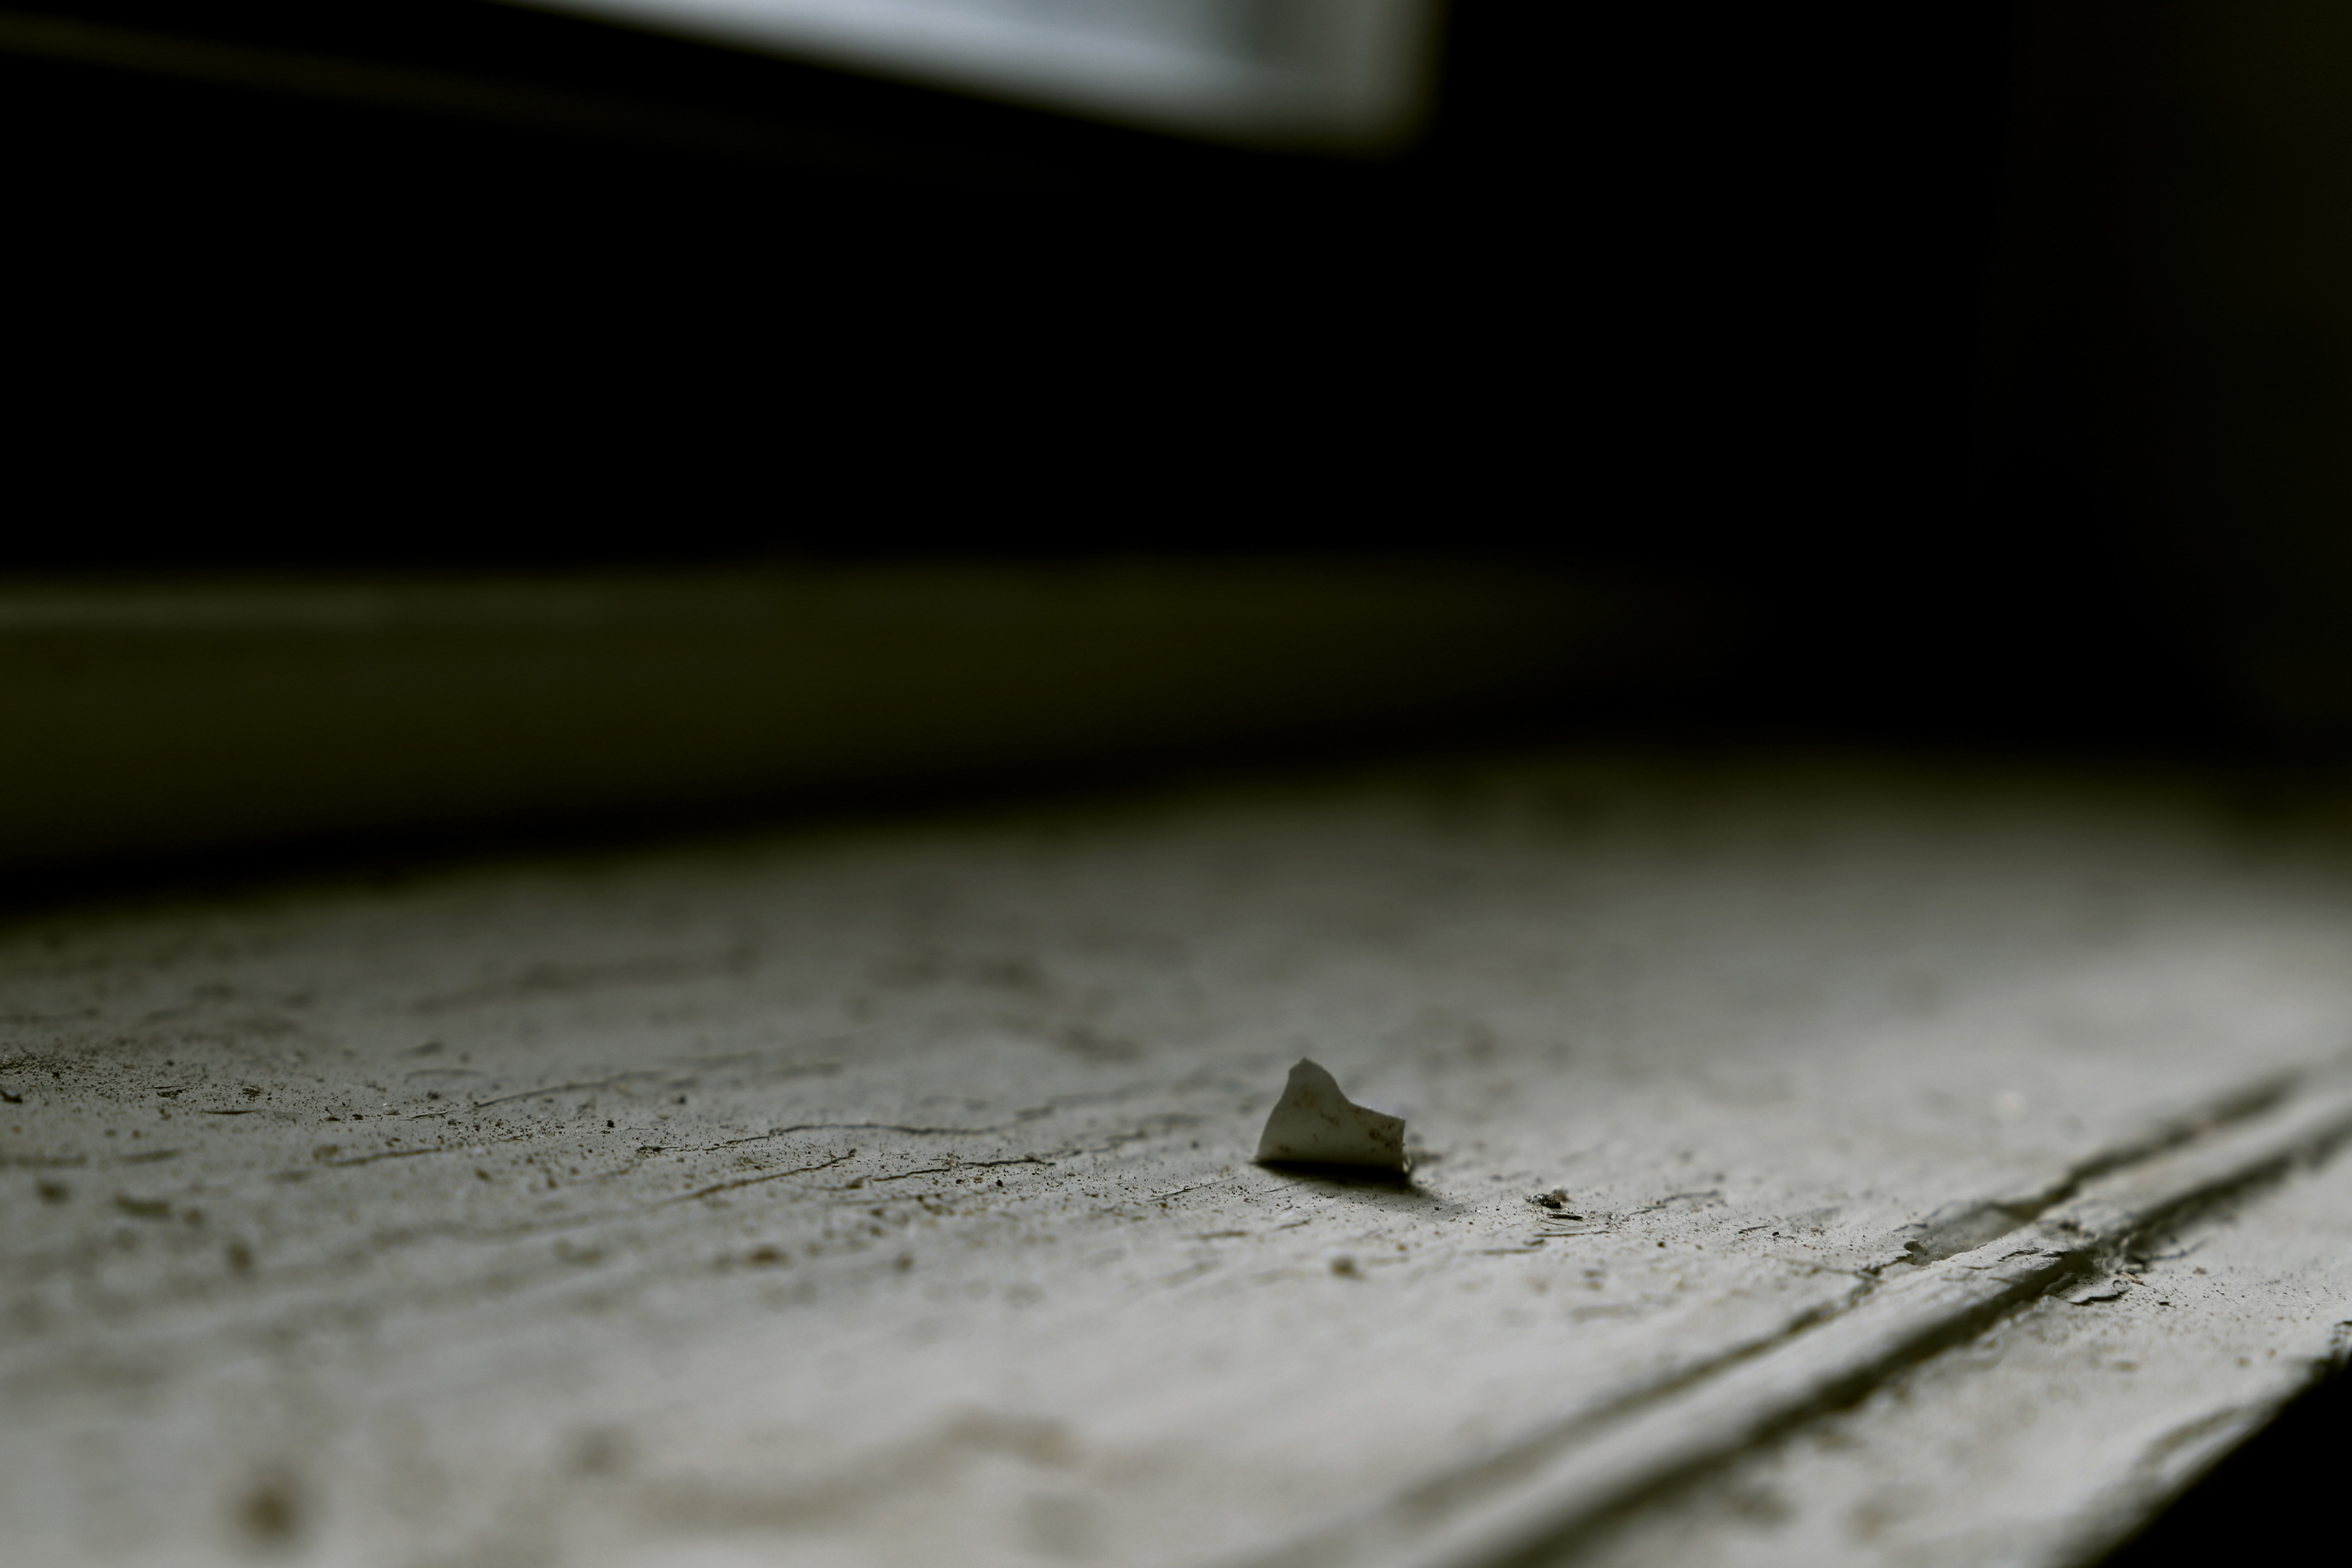 A bit of peeling paint stands up on a window sill that fades into black.